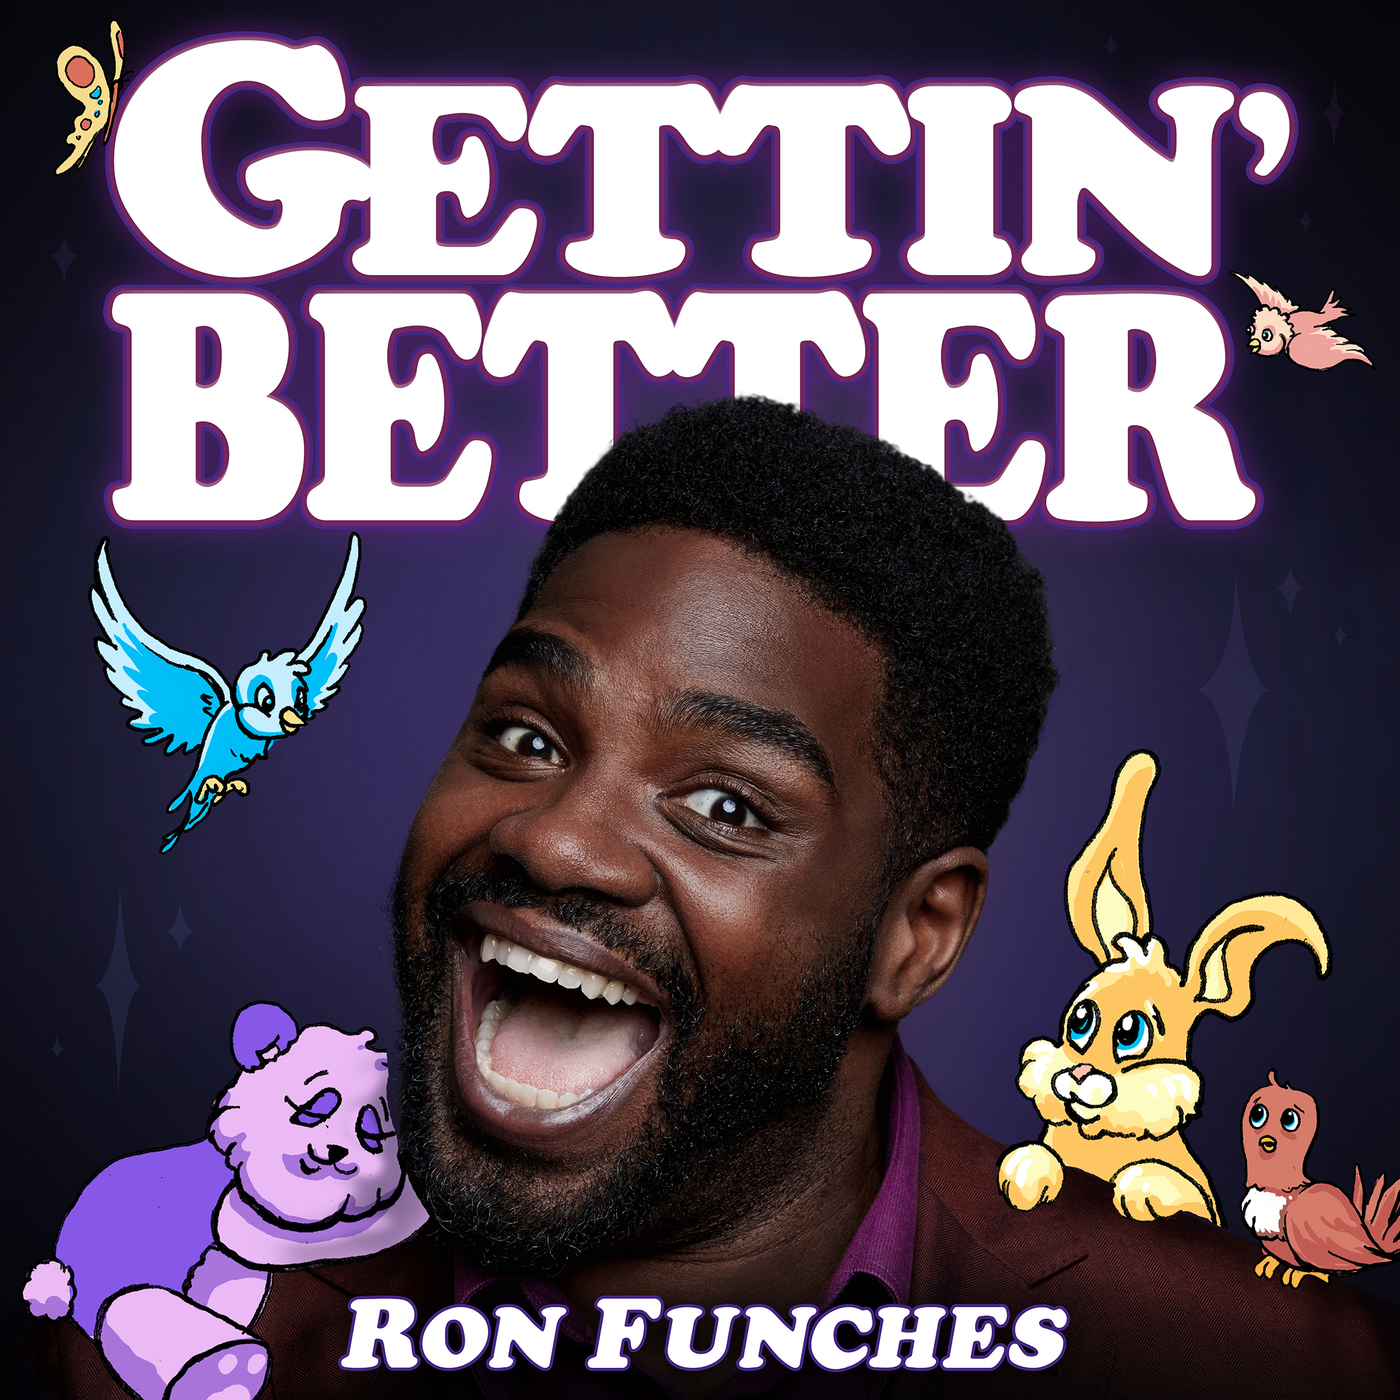 #245 - Hot City Boy with Ron Funches